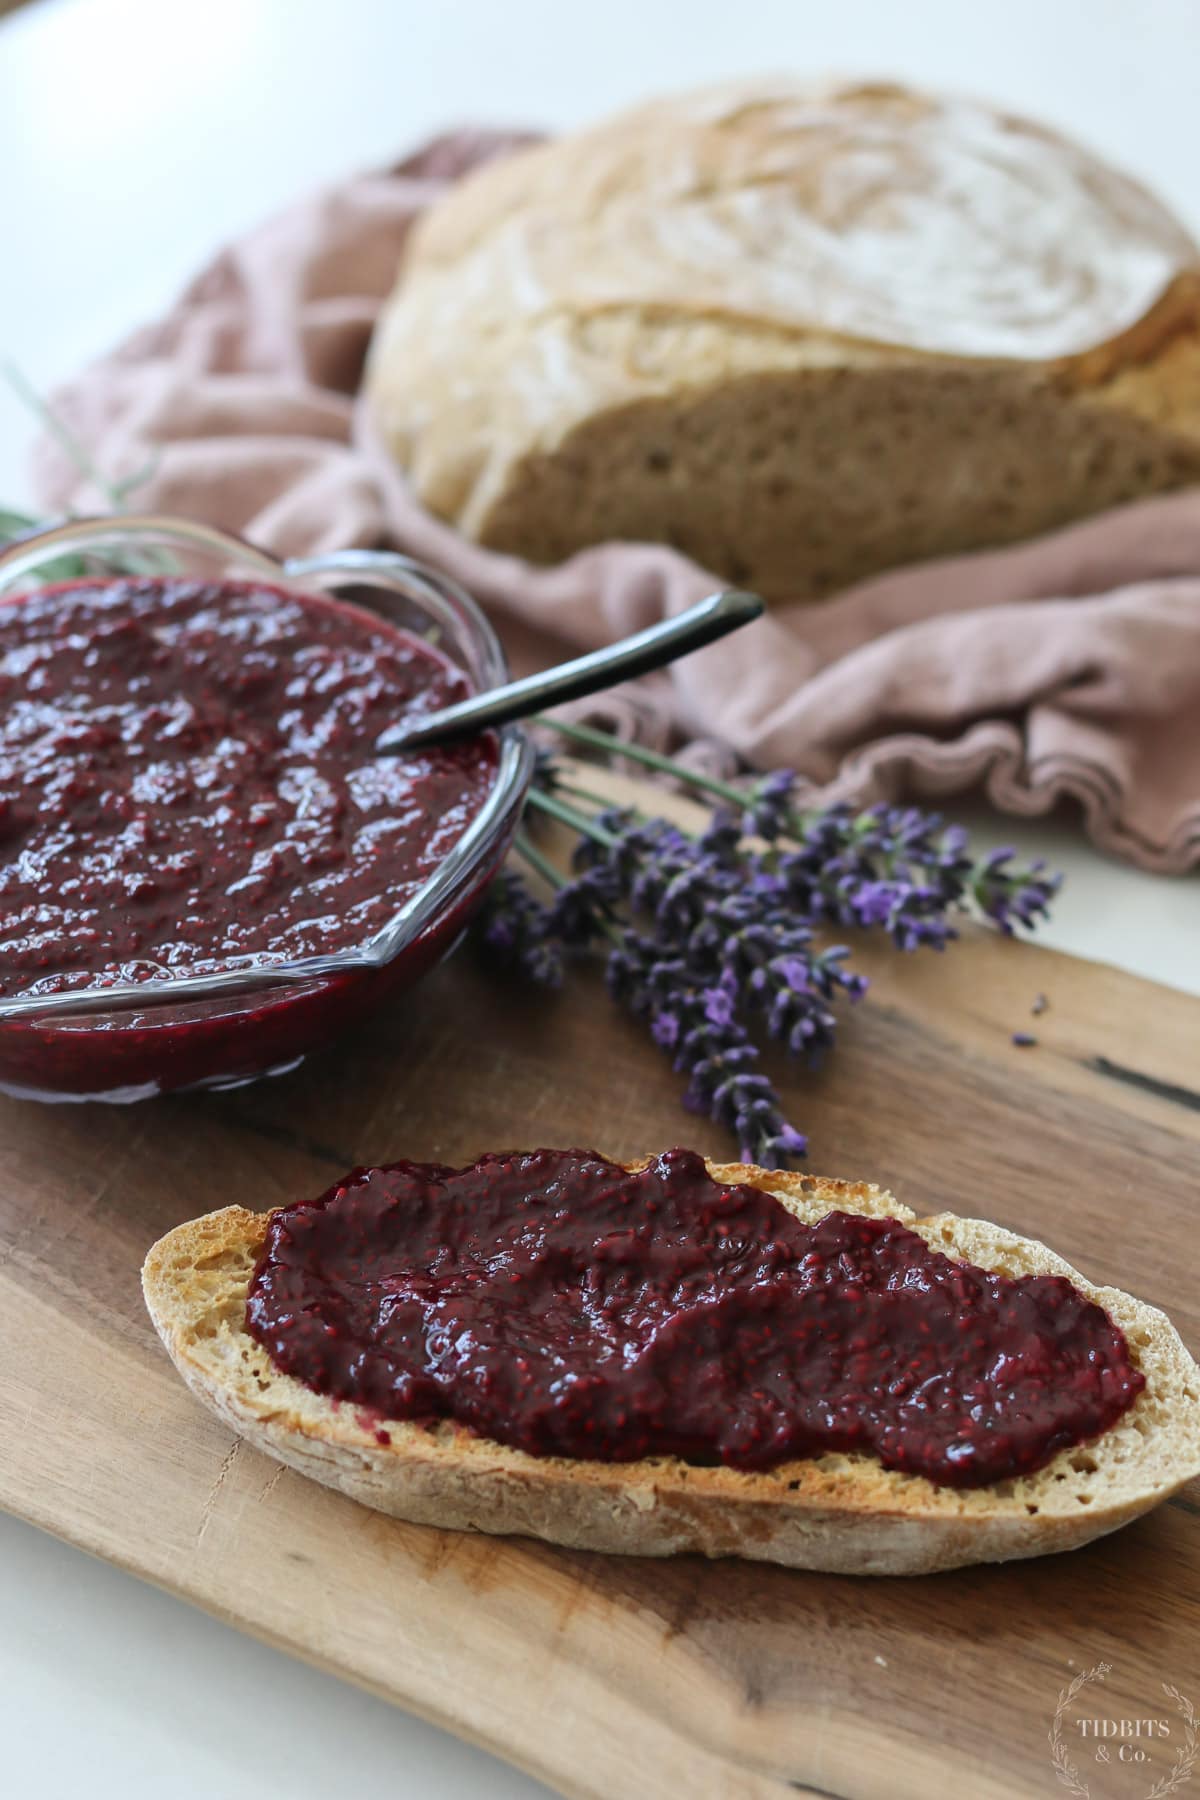 Homemade jam on a table with bread and lavender